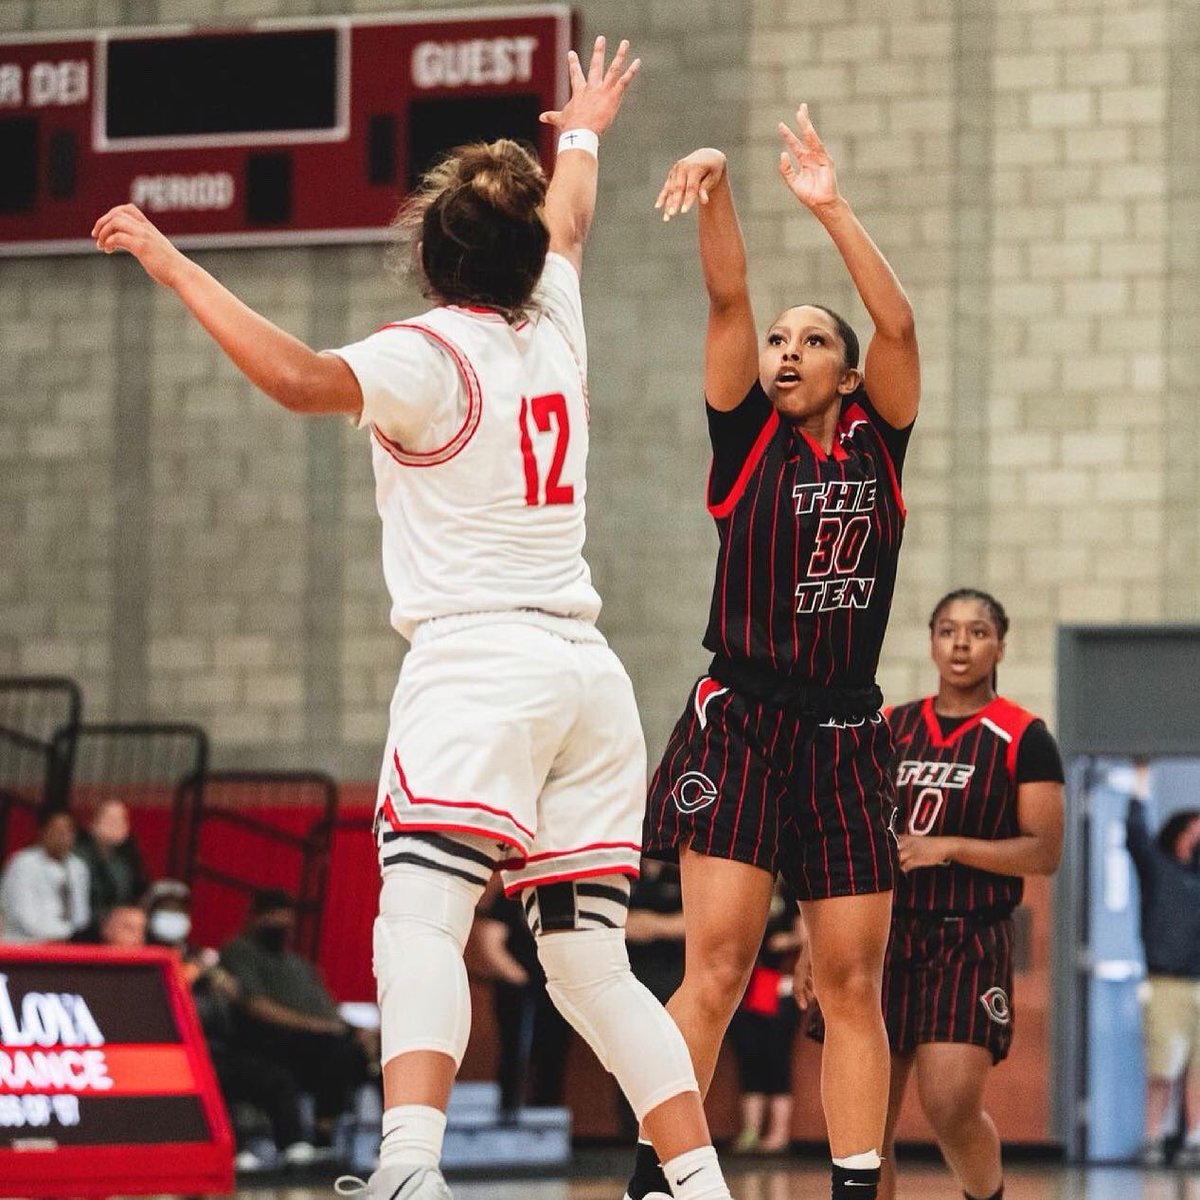 Congratulations @jayda_curry on an accomplishment that’s well deserved! Congrats on a great season and amazing career. We are extremely proud of you! #cen10basketball🏀 #cen10 #the10 #cifregionalchampions2021💍 #playeroftheyear